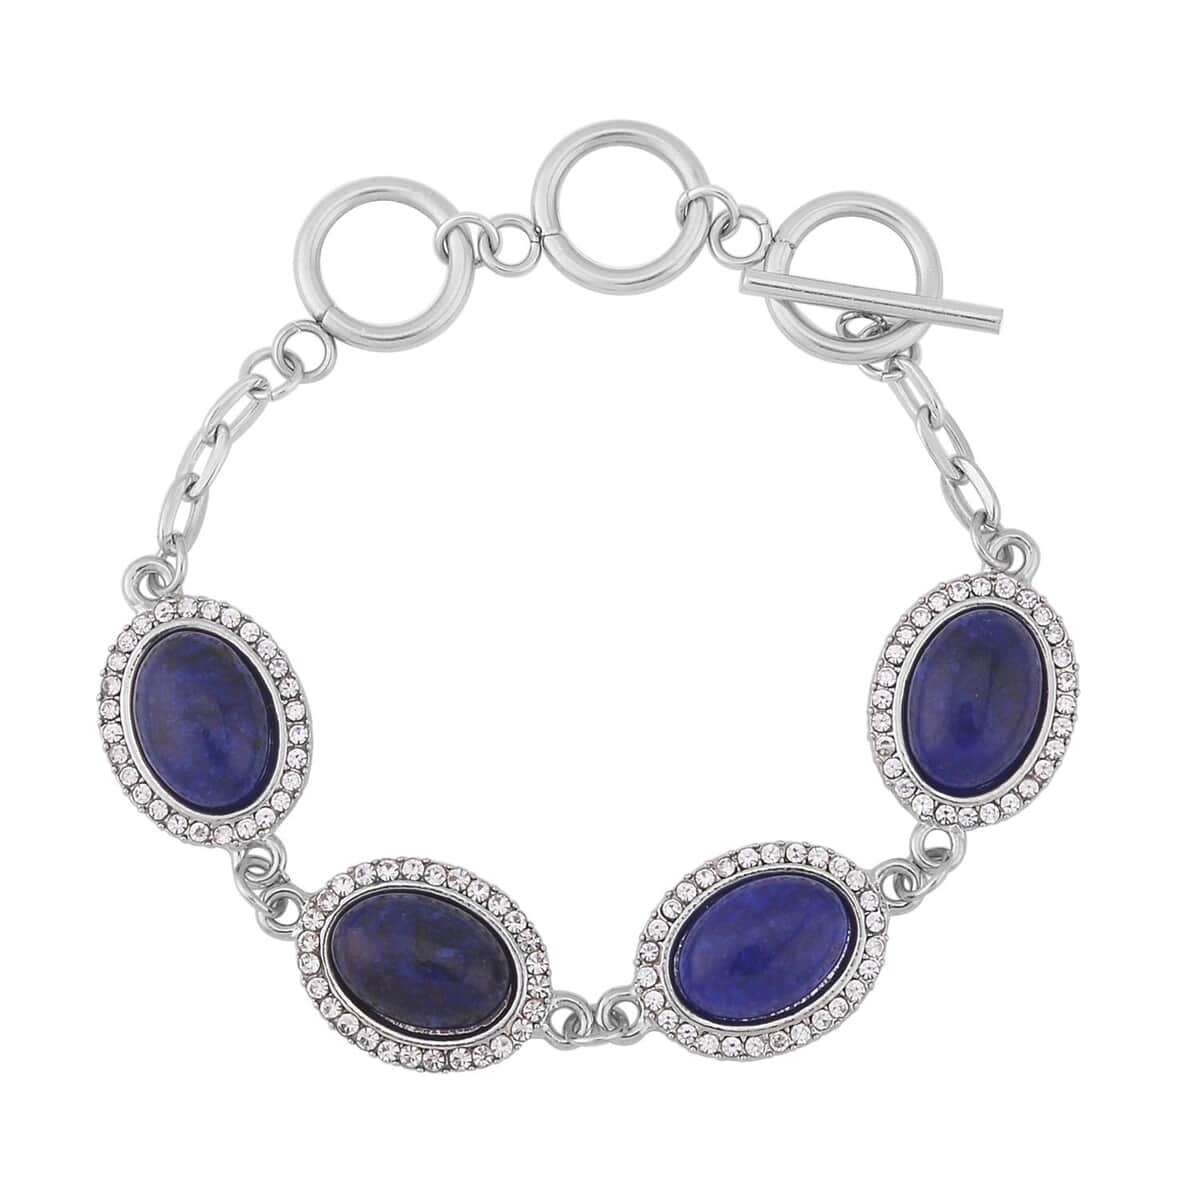 Lapis Lazuli and White Austrian Crystal 56.00 ctw Bracelet (6.50-8.0In) and Earrings in Silvertone image number 2